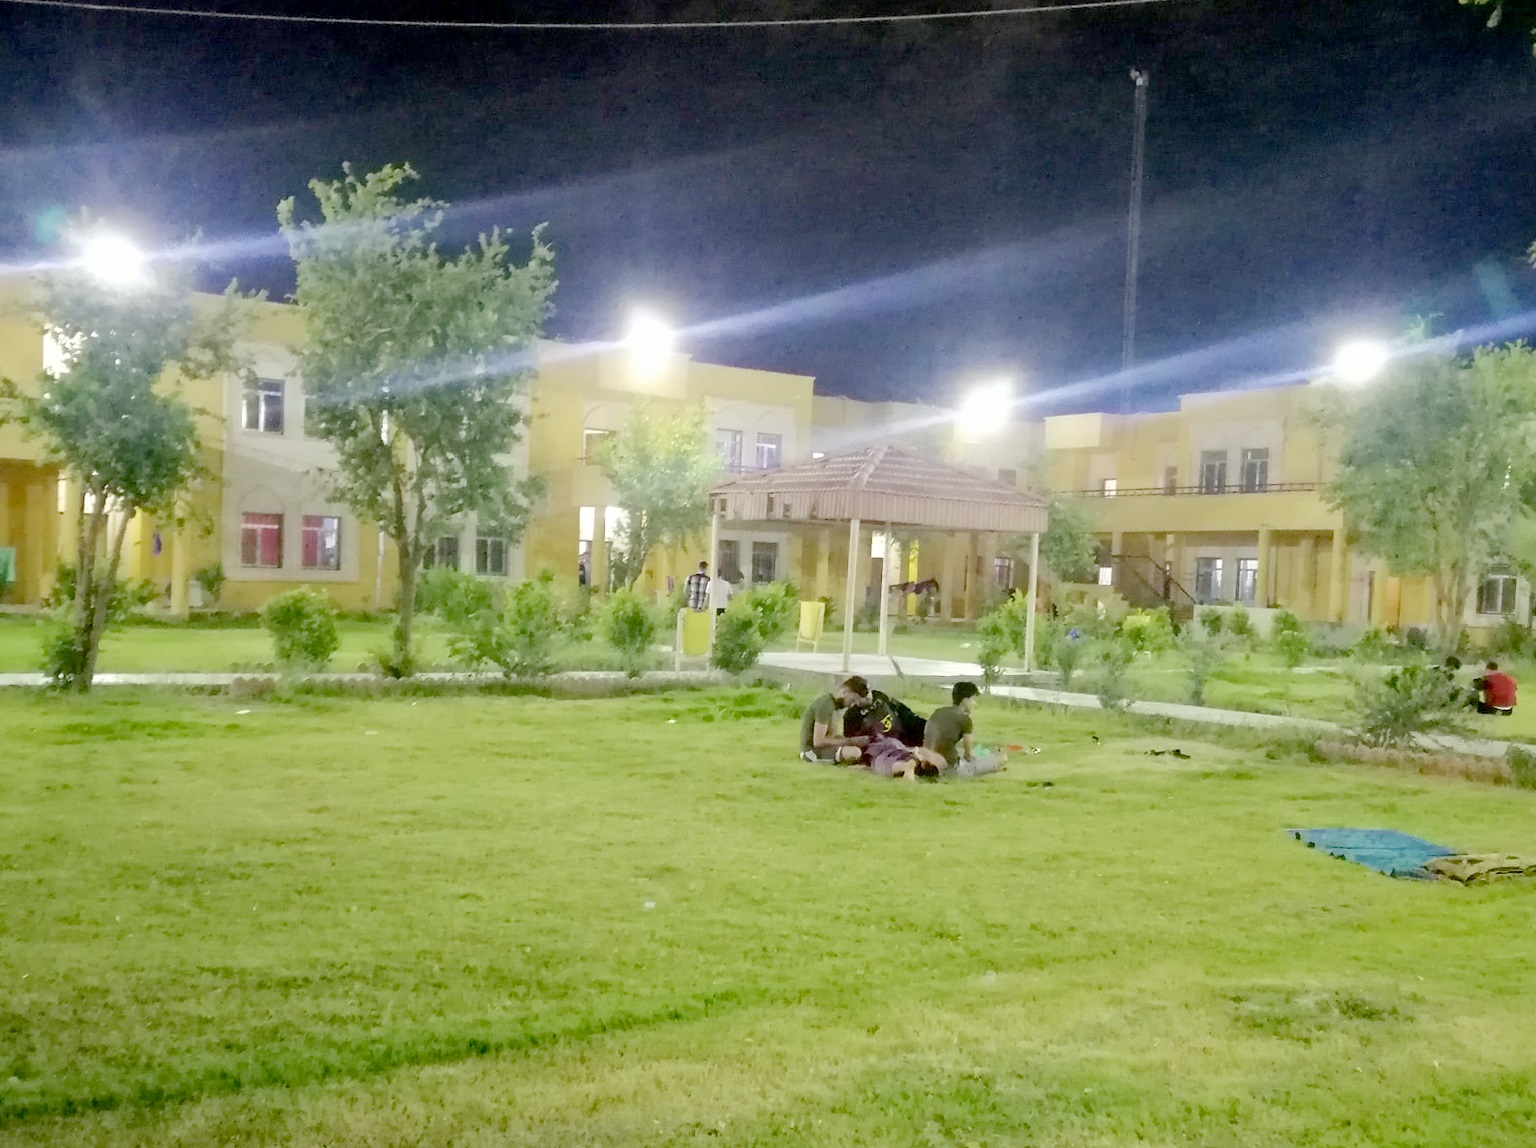 The Maintenance and Services Division Lights the Yards of the Hostels Complexes